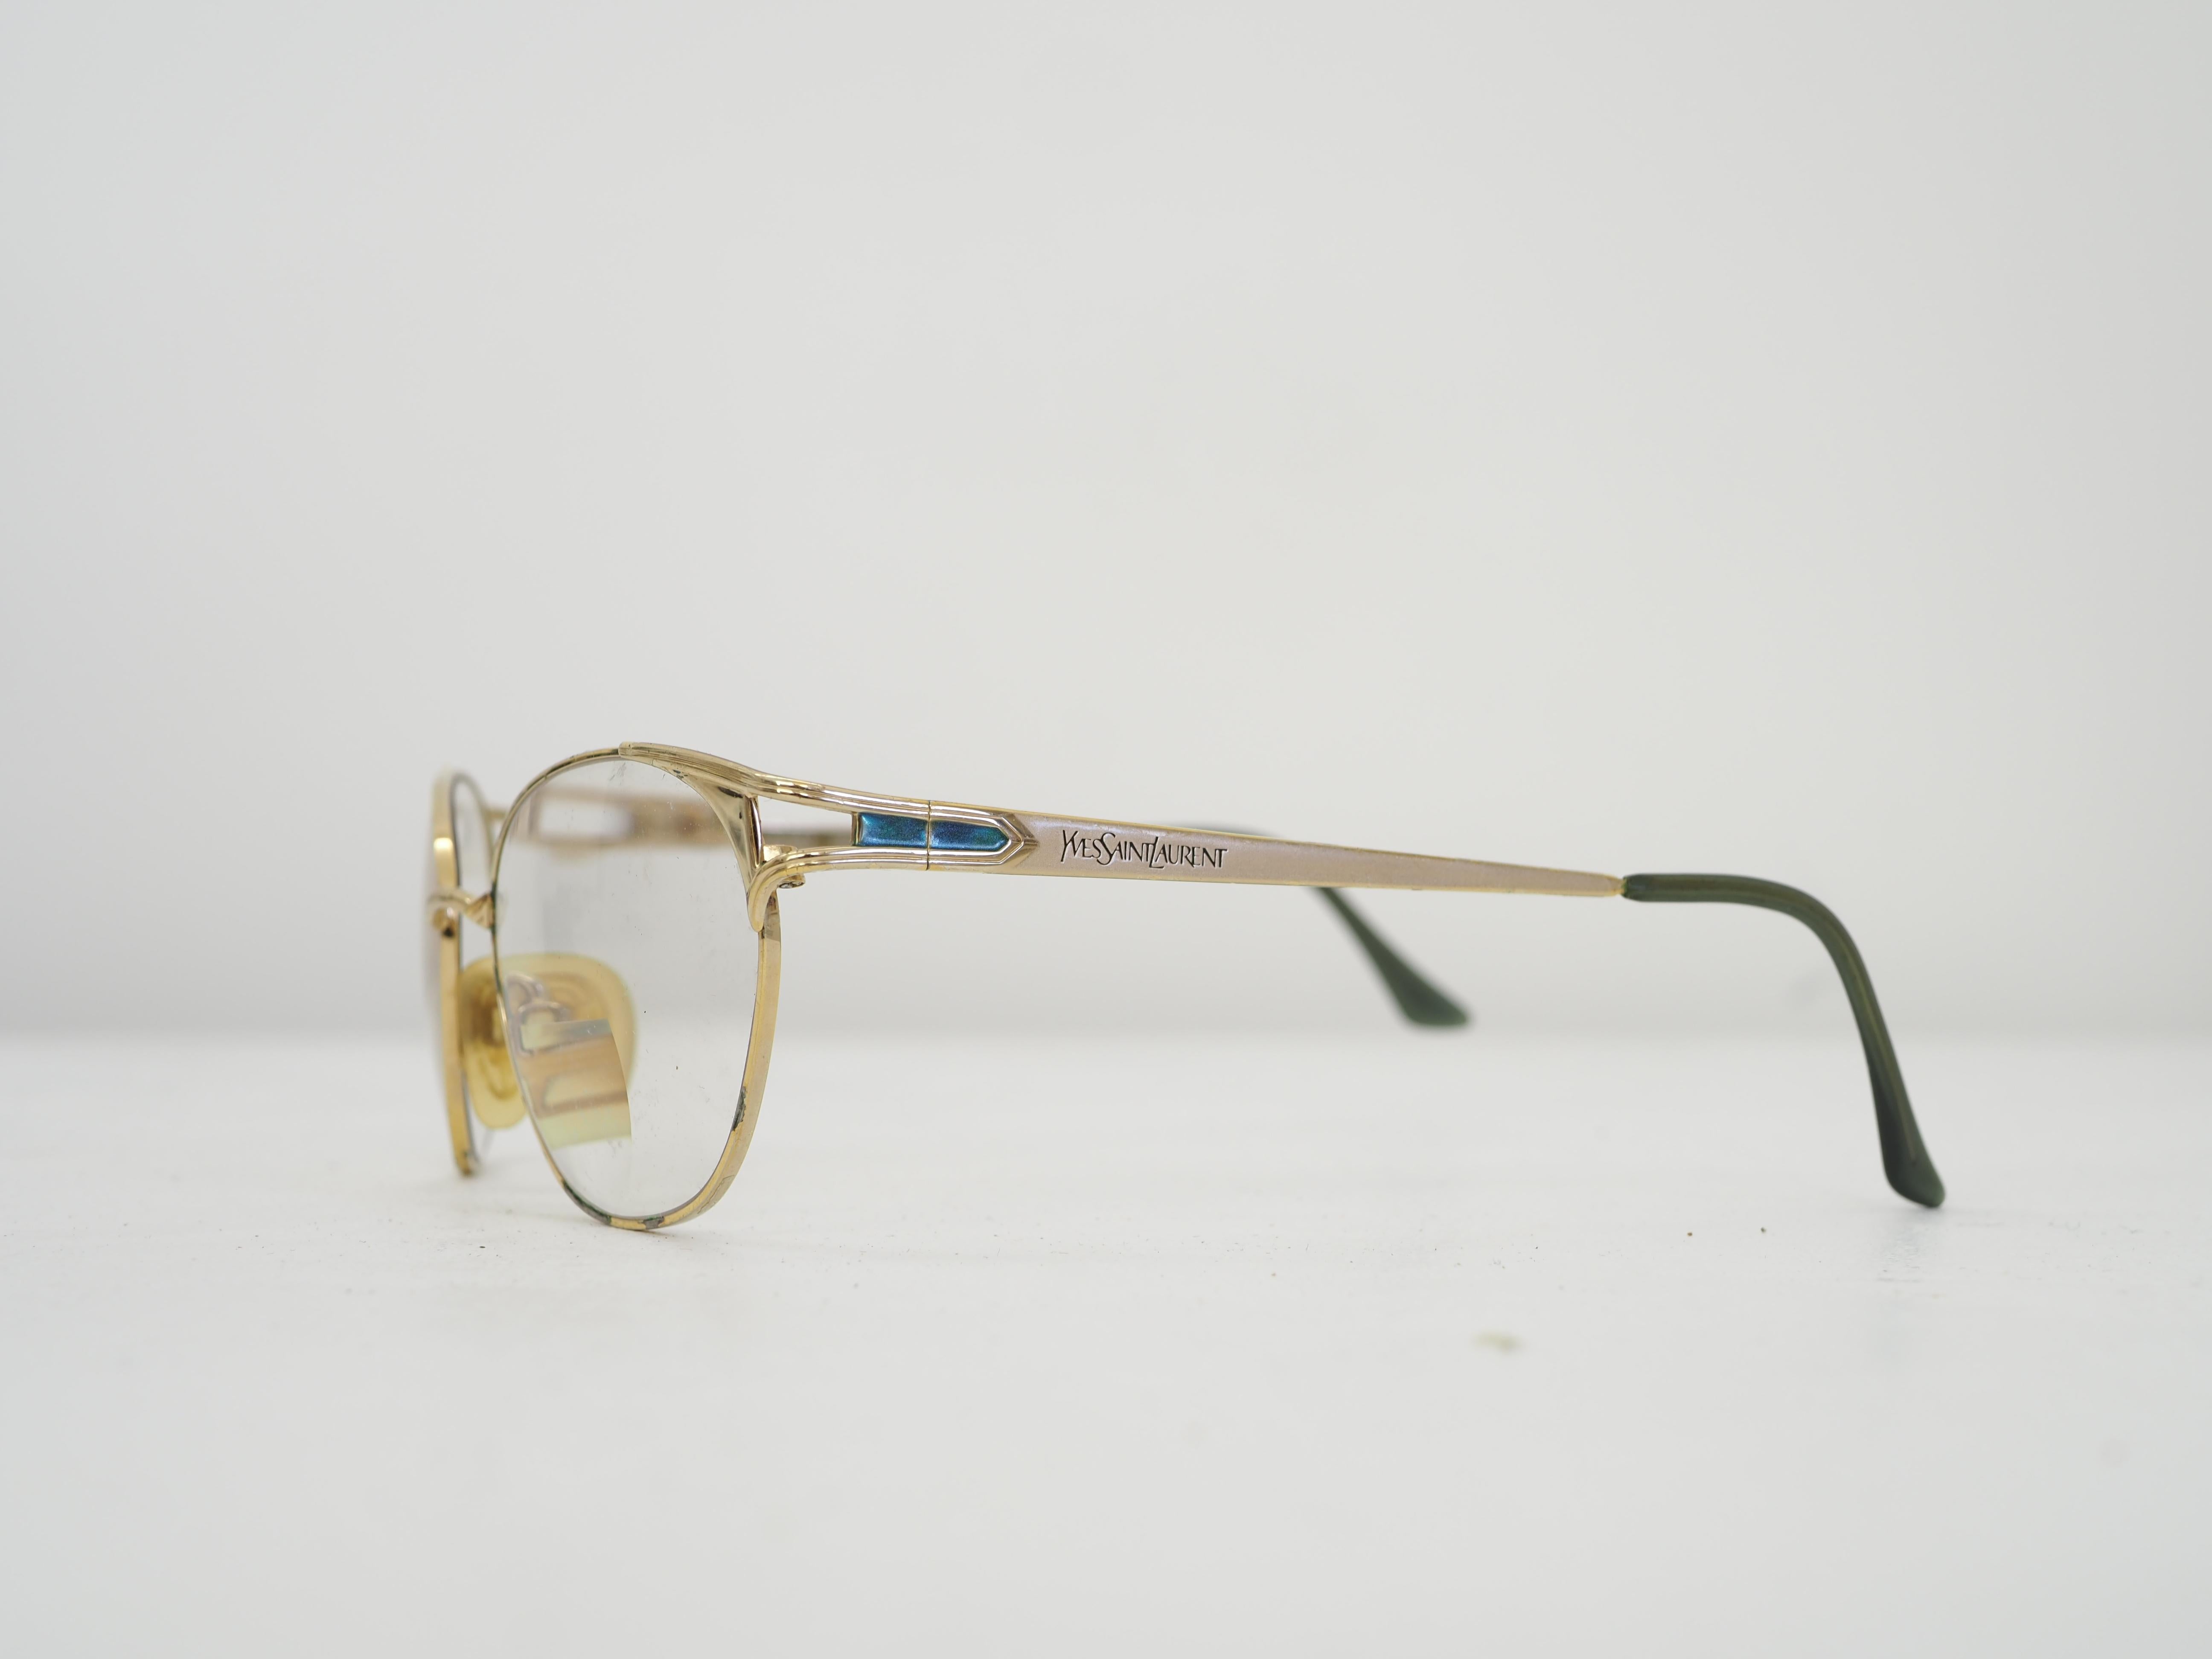 1990s Yves Saint Laurent frame In Good Condition For Sale In Capri, IT